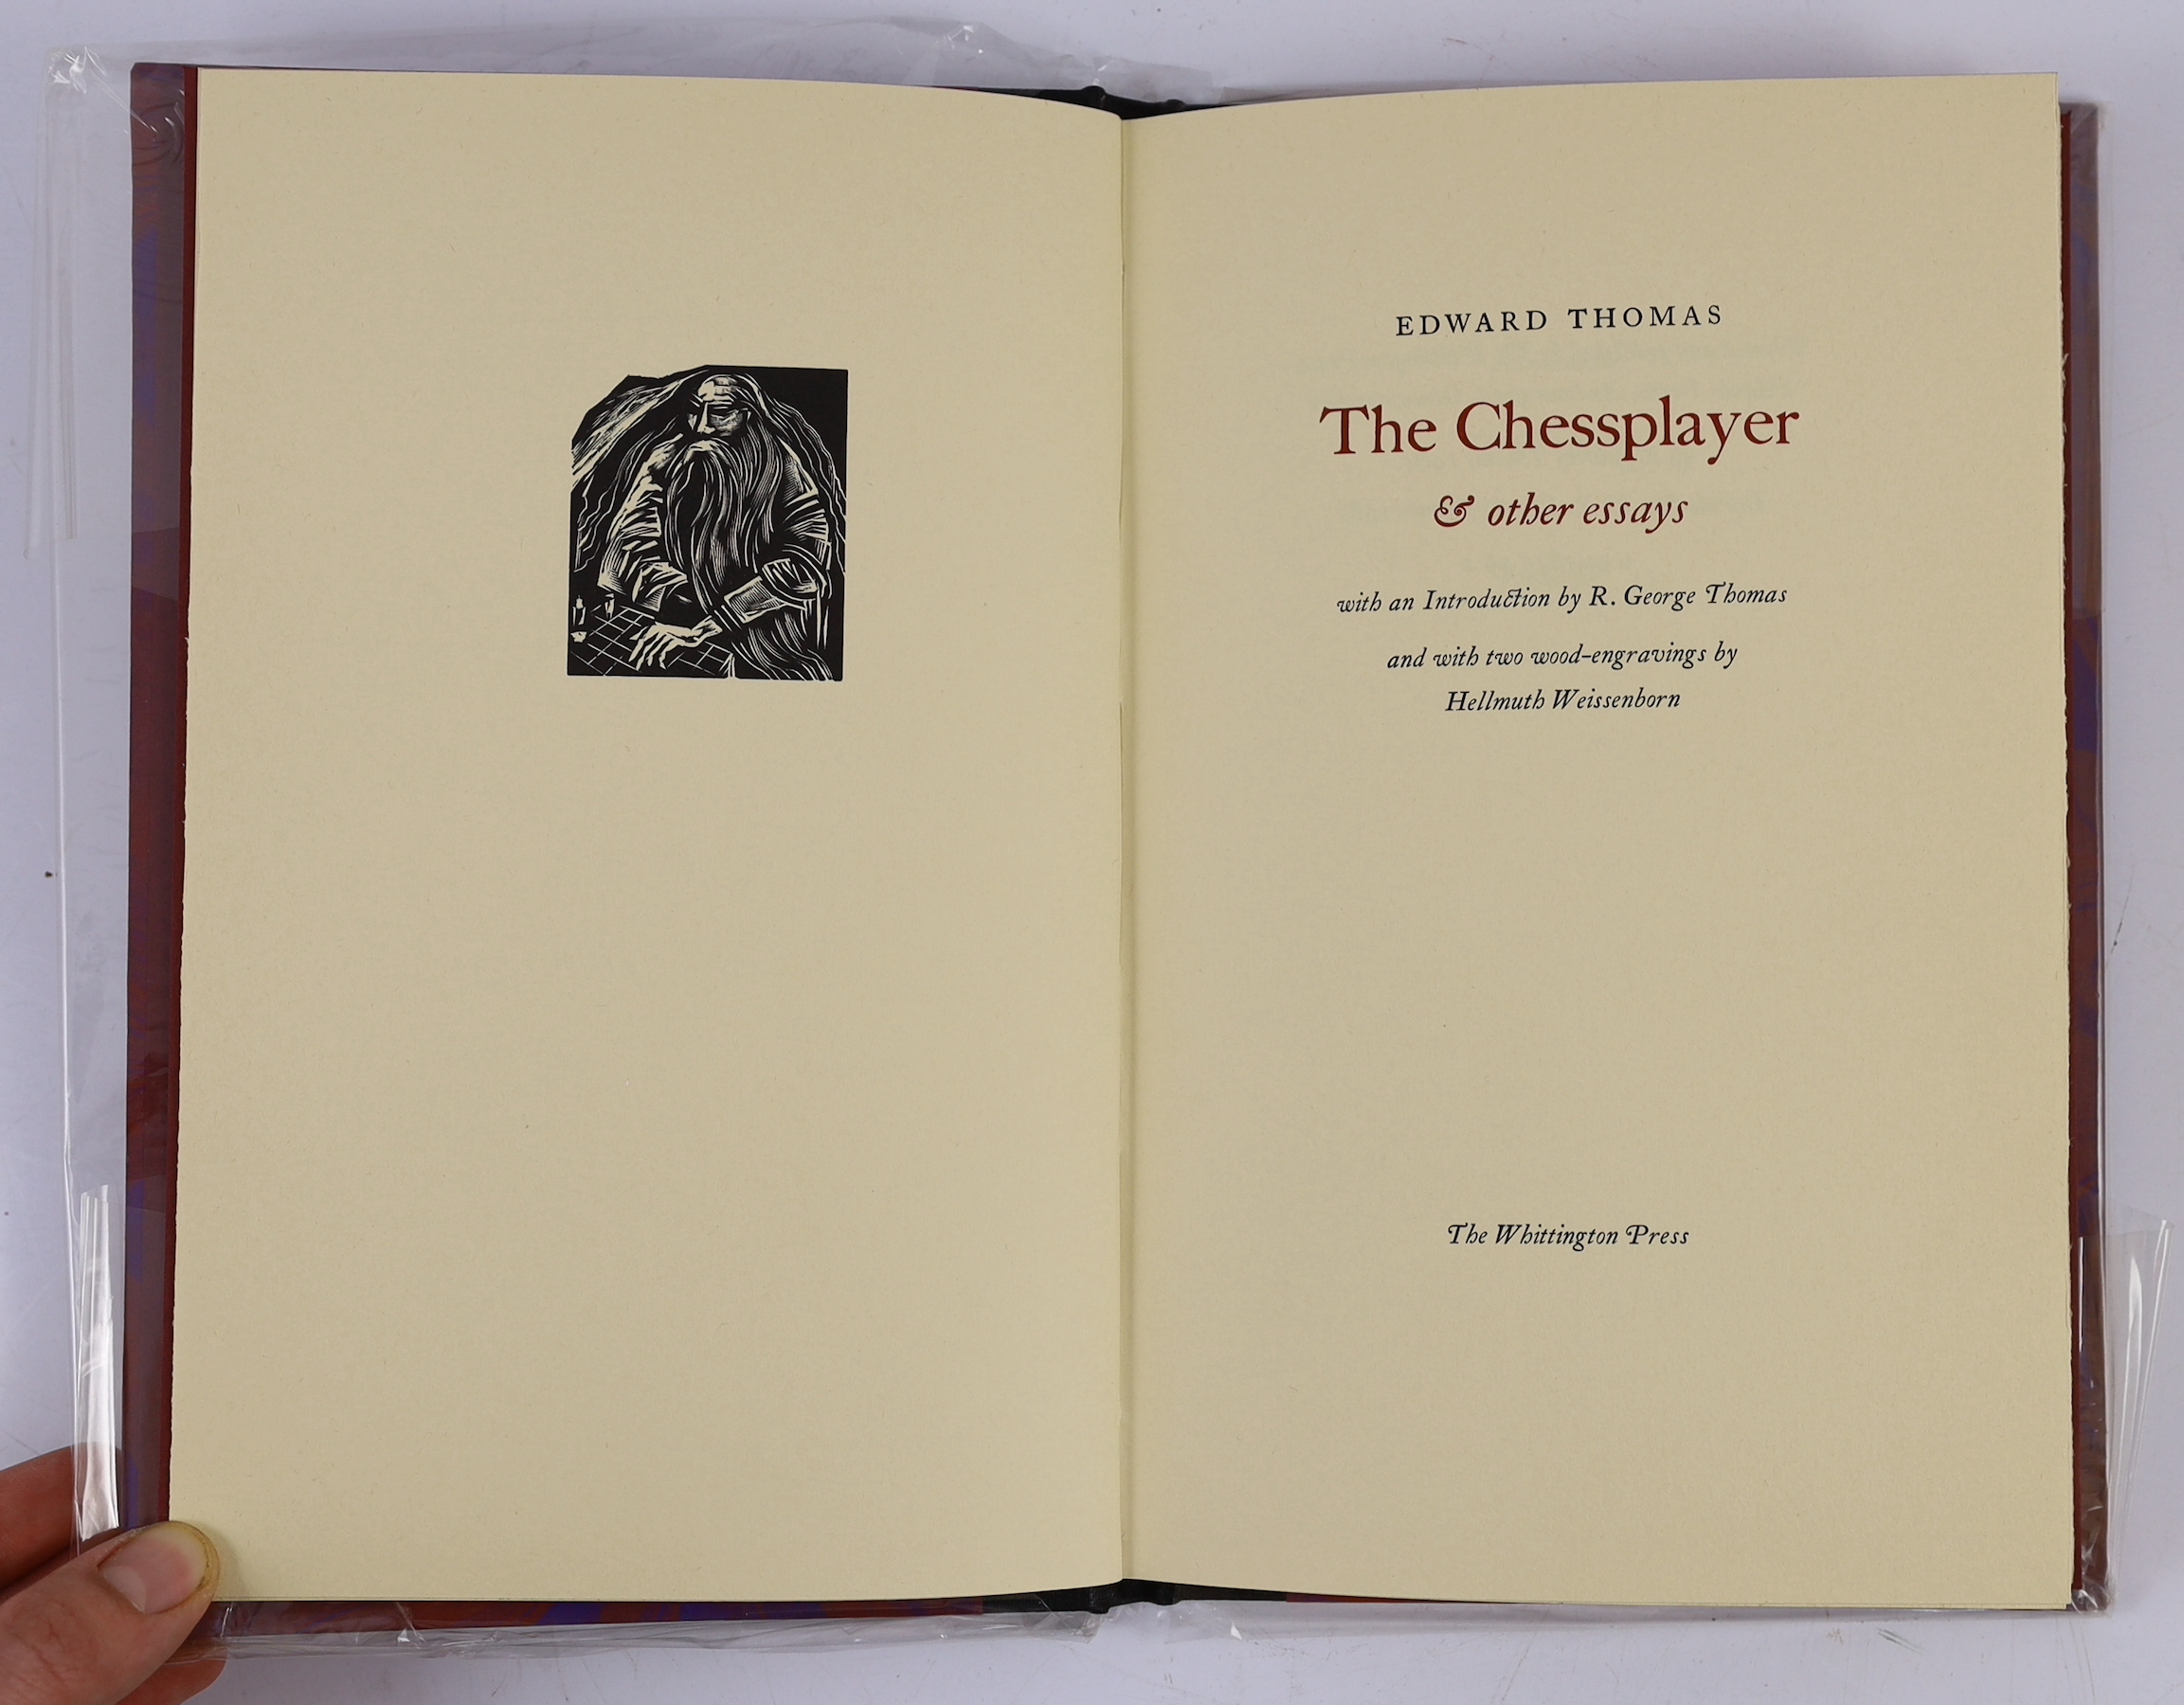 Thomas, Edward. The Chessplayer & other essays with an Introduction by R. George Thomas and with two wood-engravings by Hellmuth Weissenborn. The Whittington Press, Andoversford, Gloucestershire, 1981. Number 221 of a li